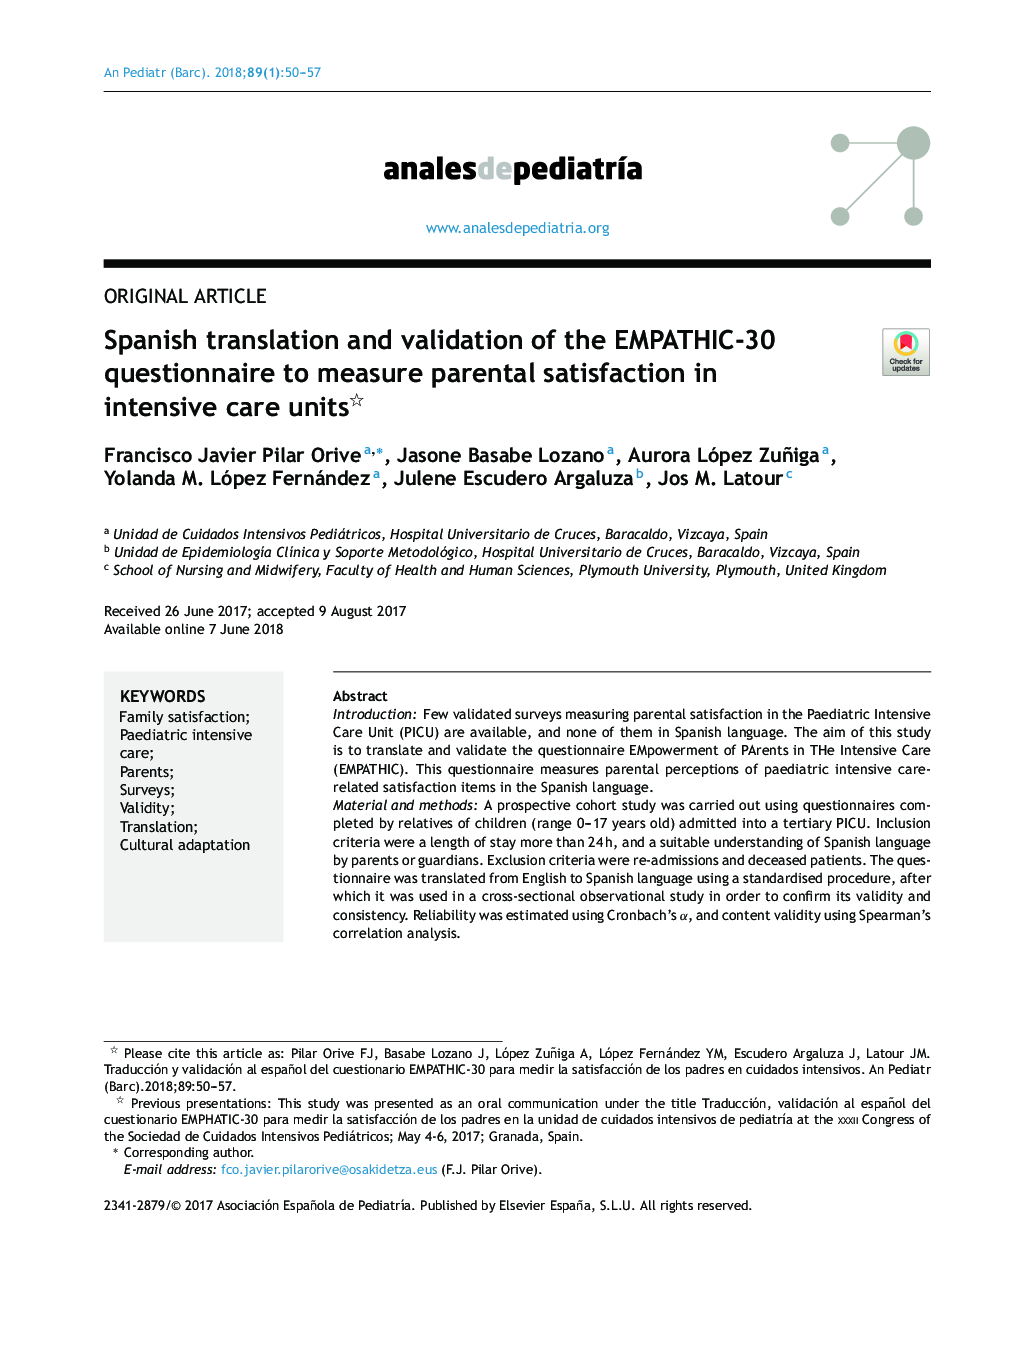 Spanish translation and validation of the EMPATHIC-30 questionnaire to measure parental satisfaction in intensive care units